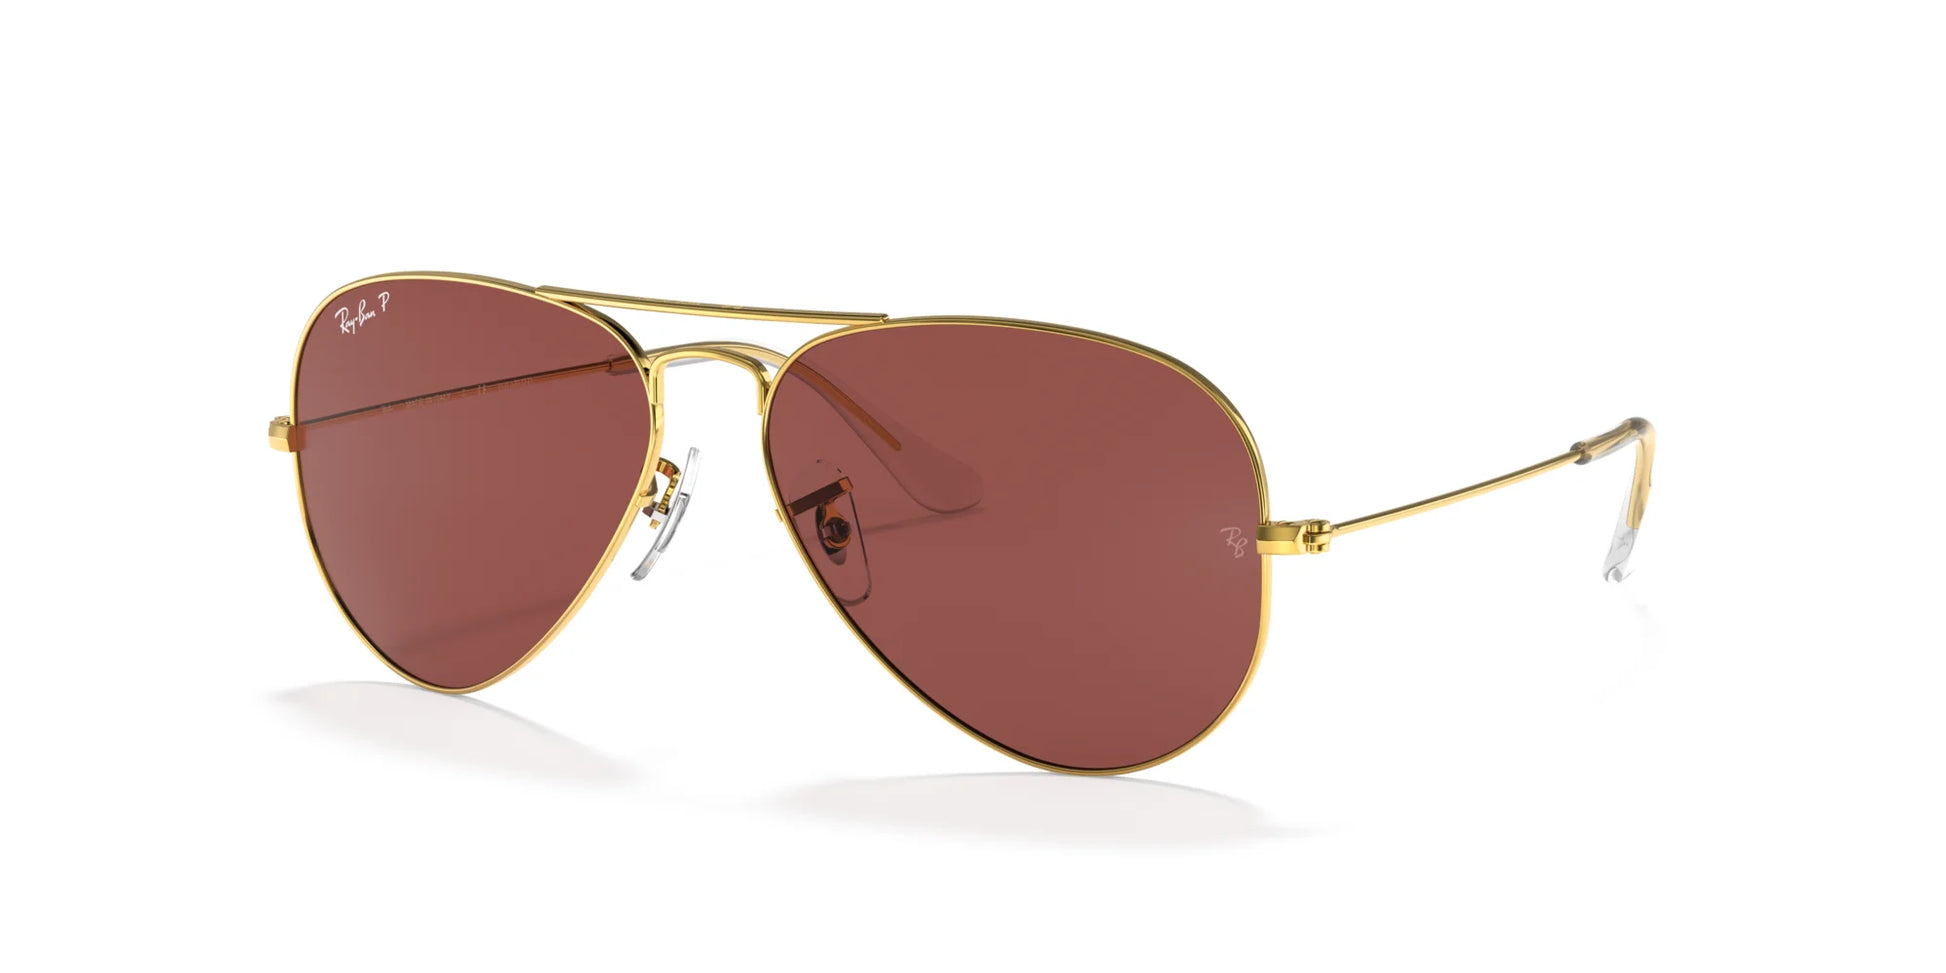 Ray-Ban AVIATOR LARGE METAL RB3025 Sunglasses | Size 58 Gold / Violet